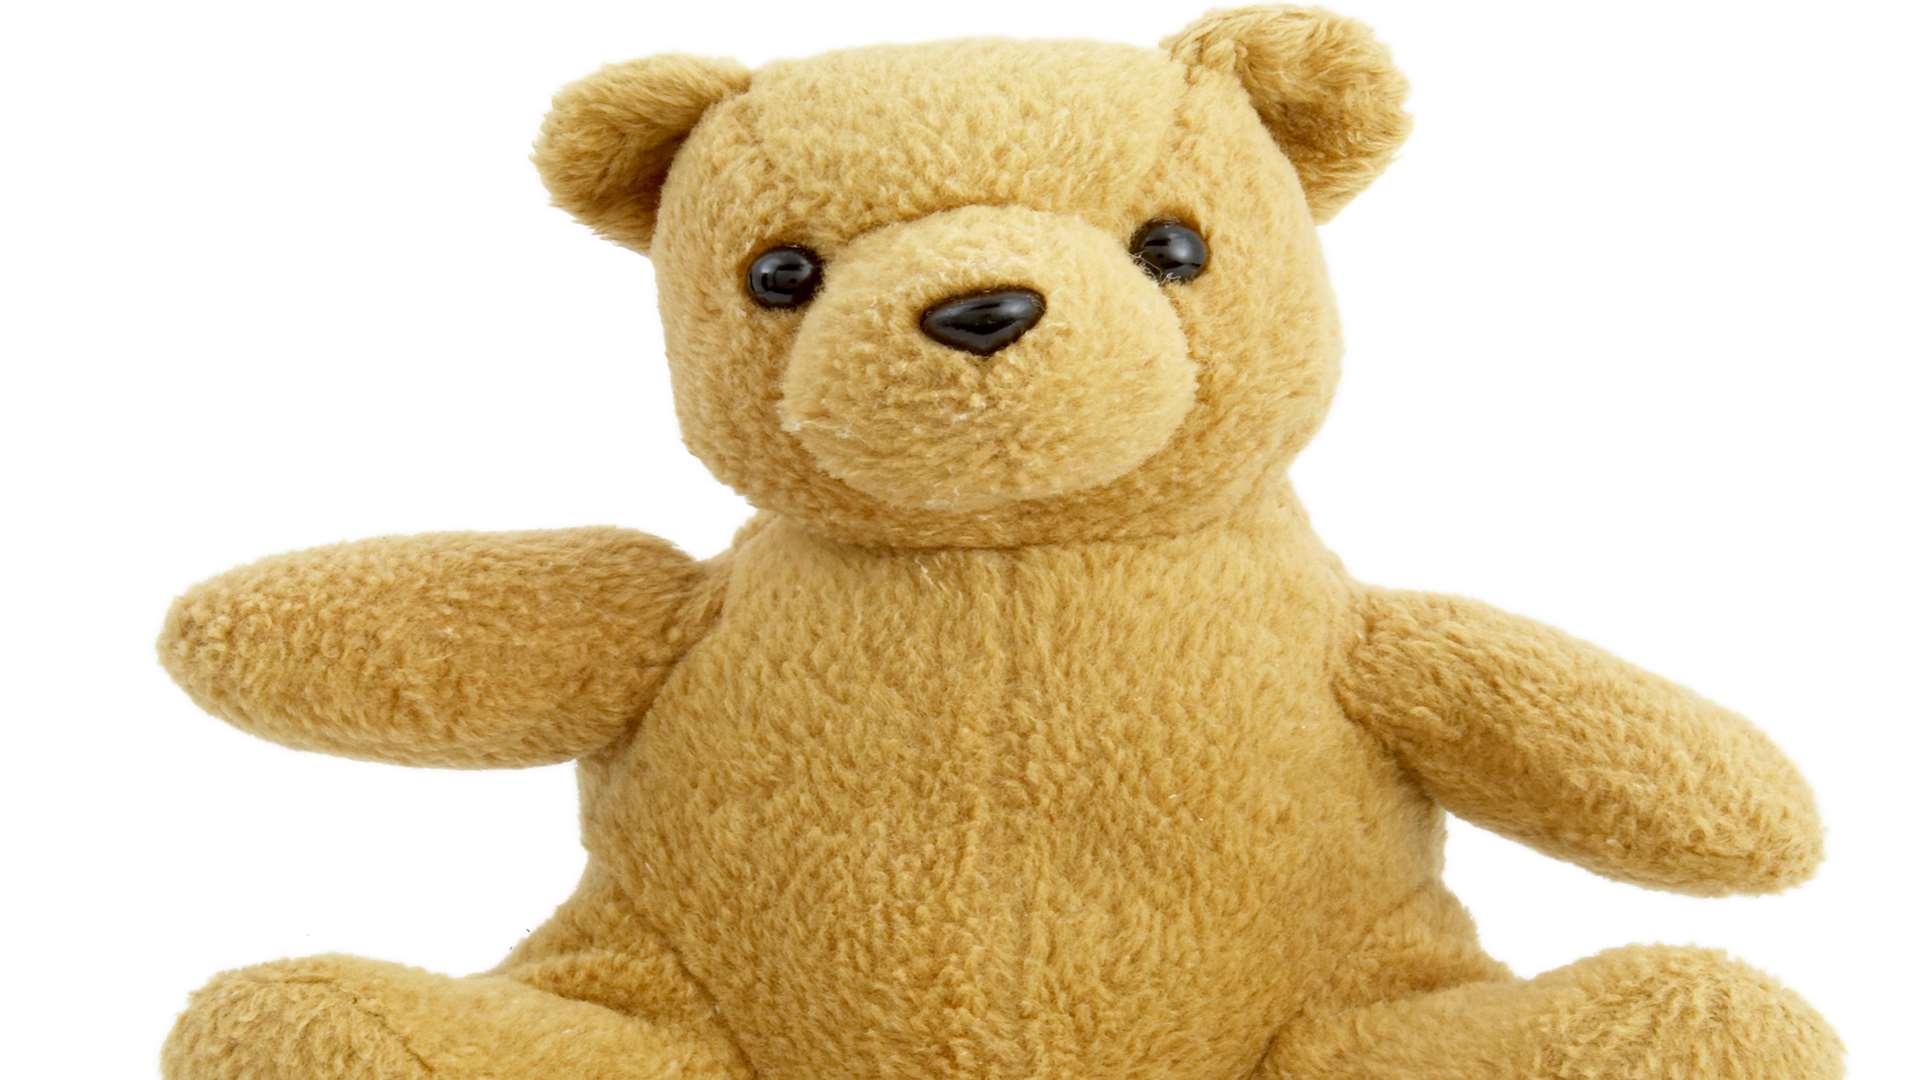 Head to the teddy bear repair clinic this weekend. Stock picture